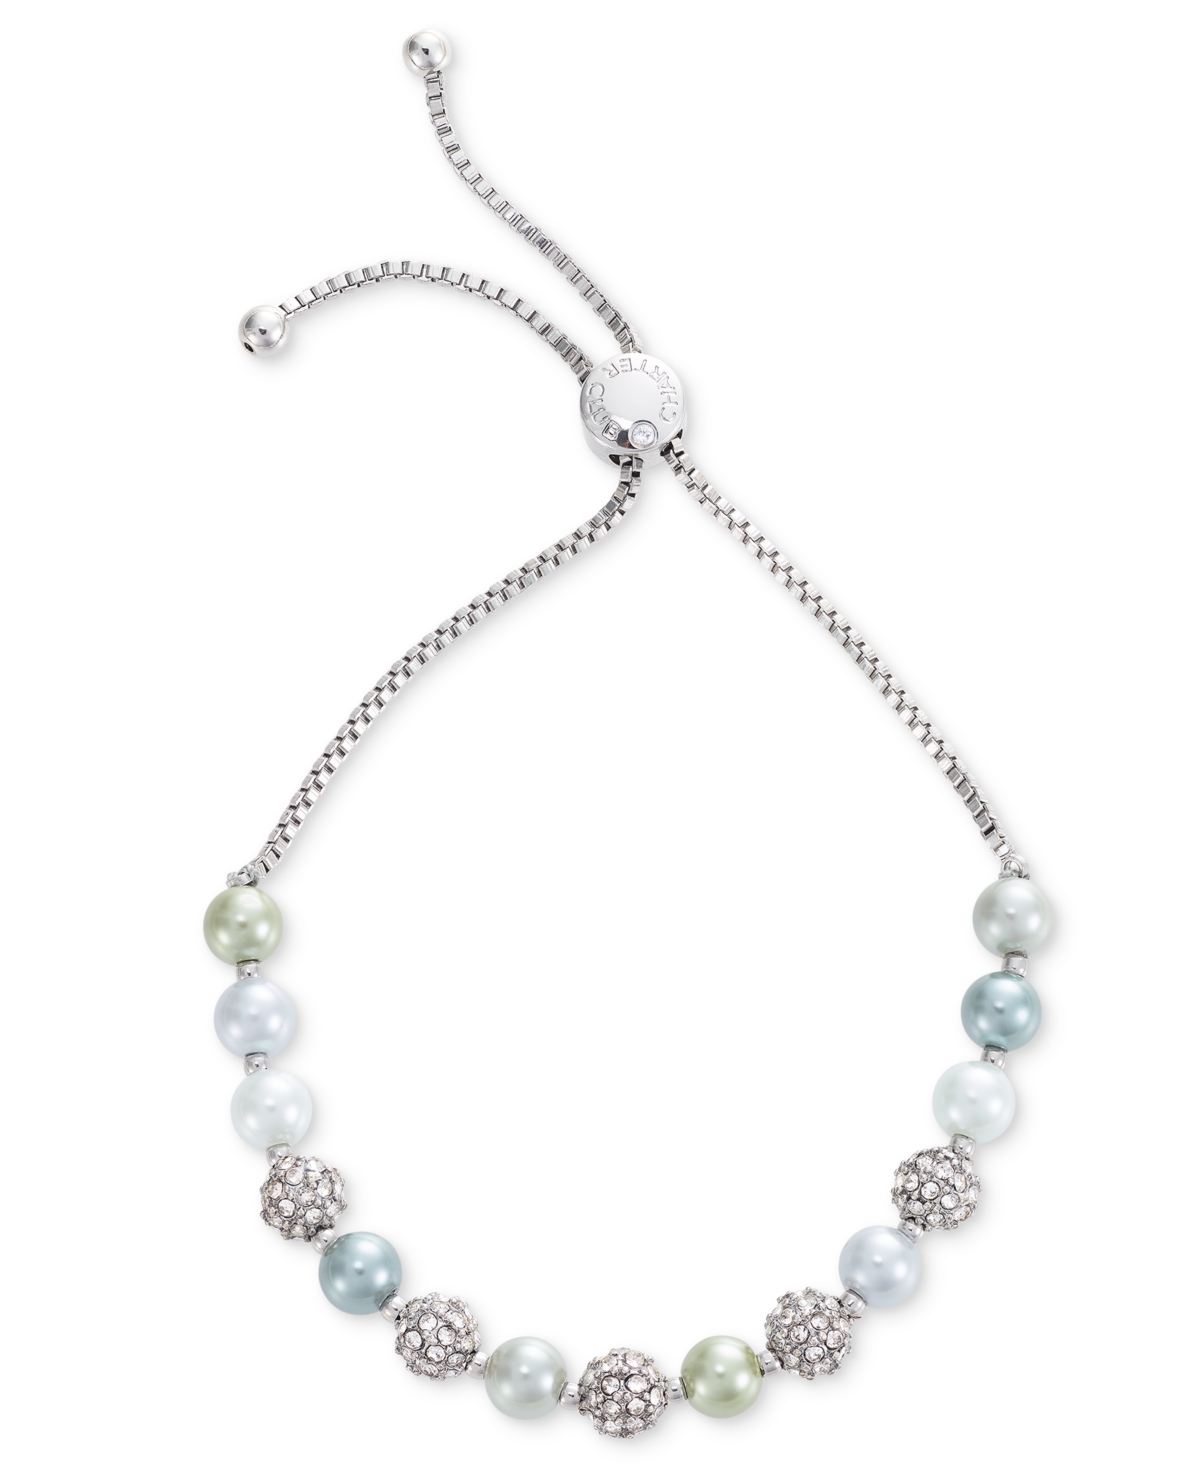 Silver-Tone Pave Fireball & Color Imitation Pearl Slider Bracelet, Created for Macy's - Multi